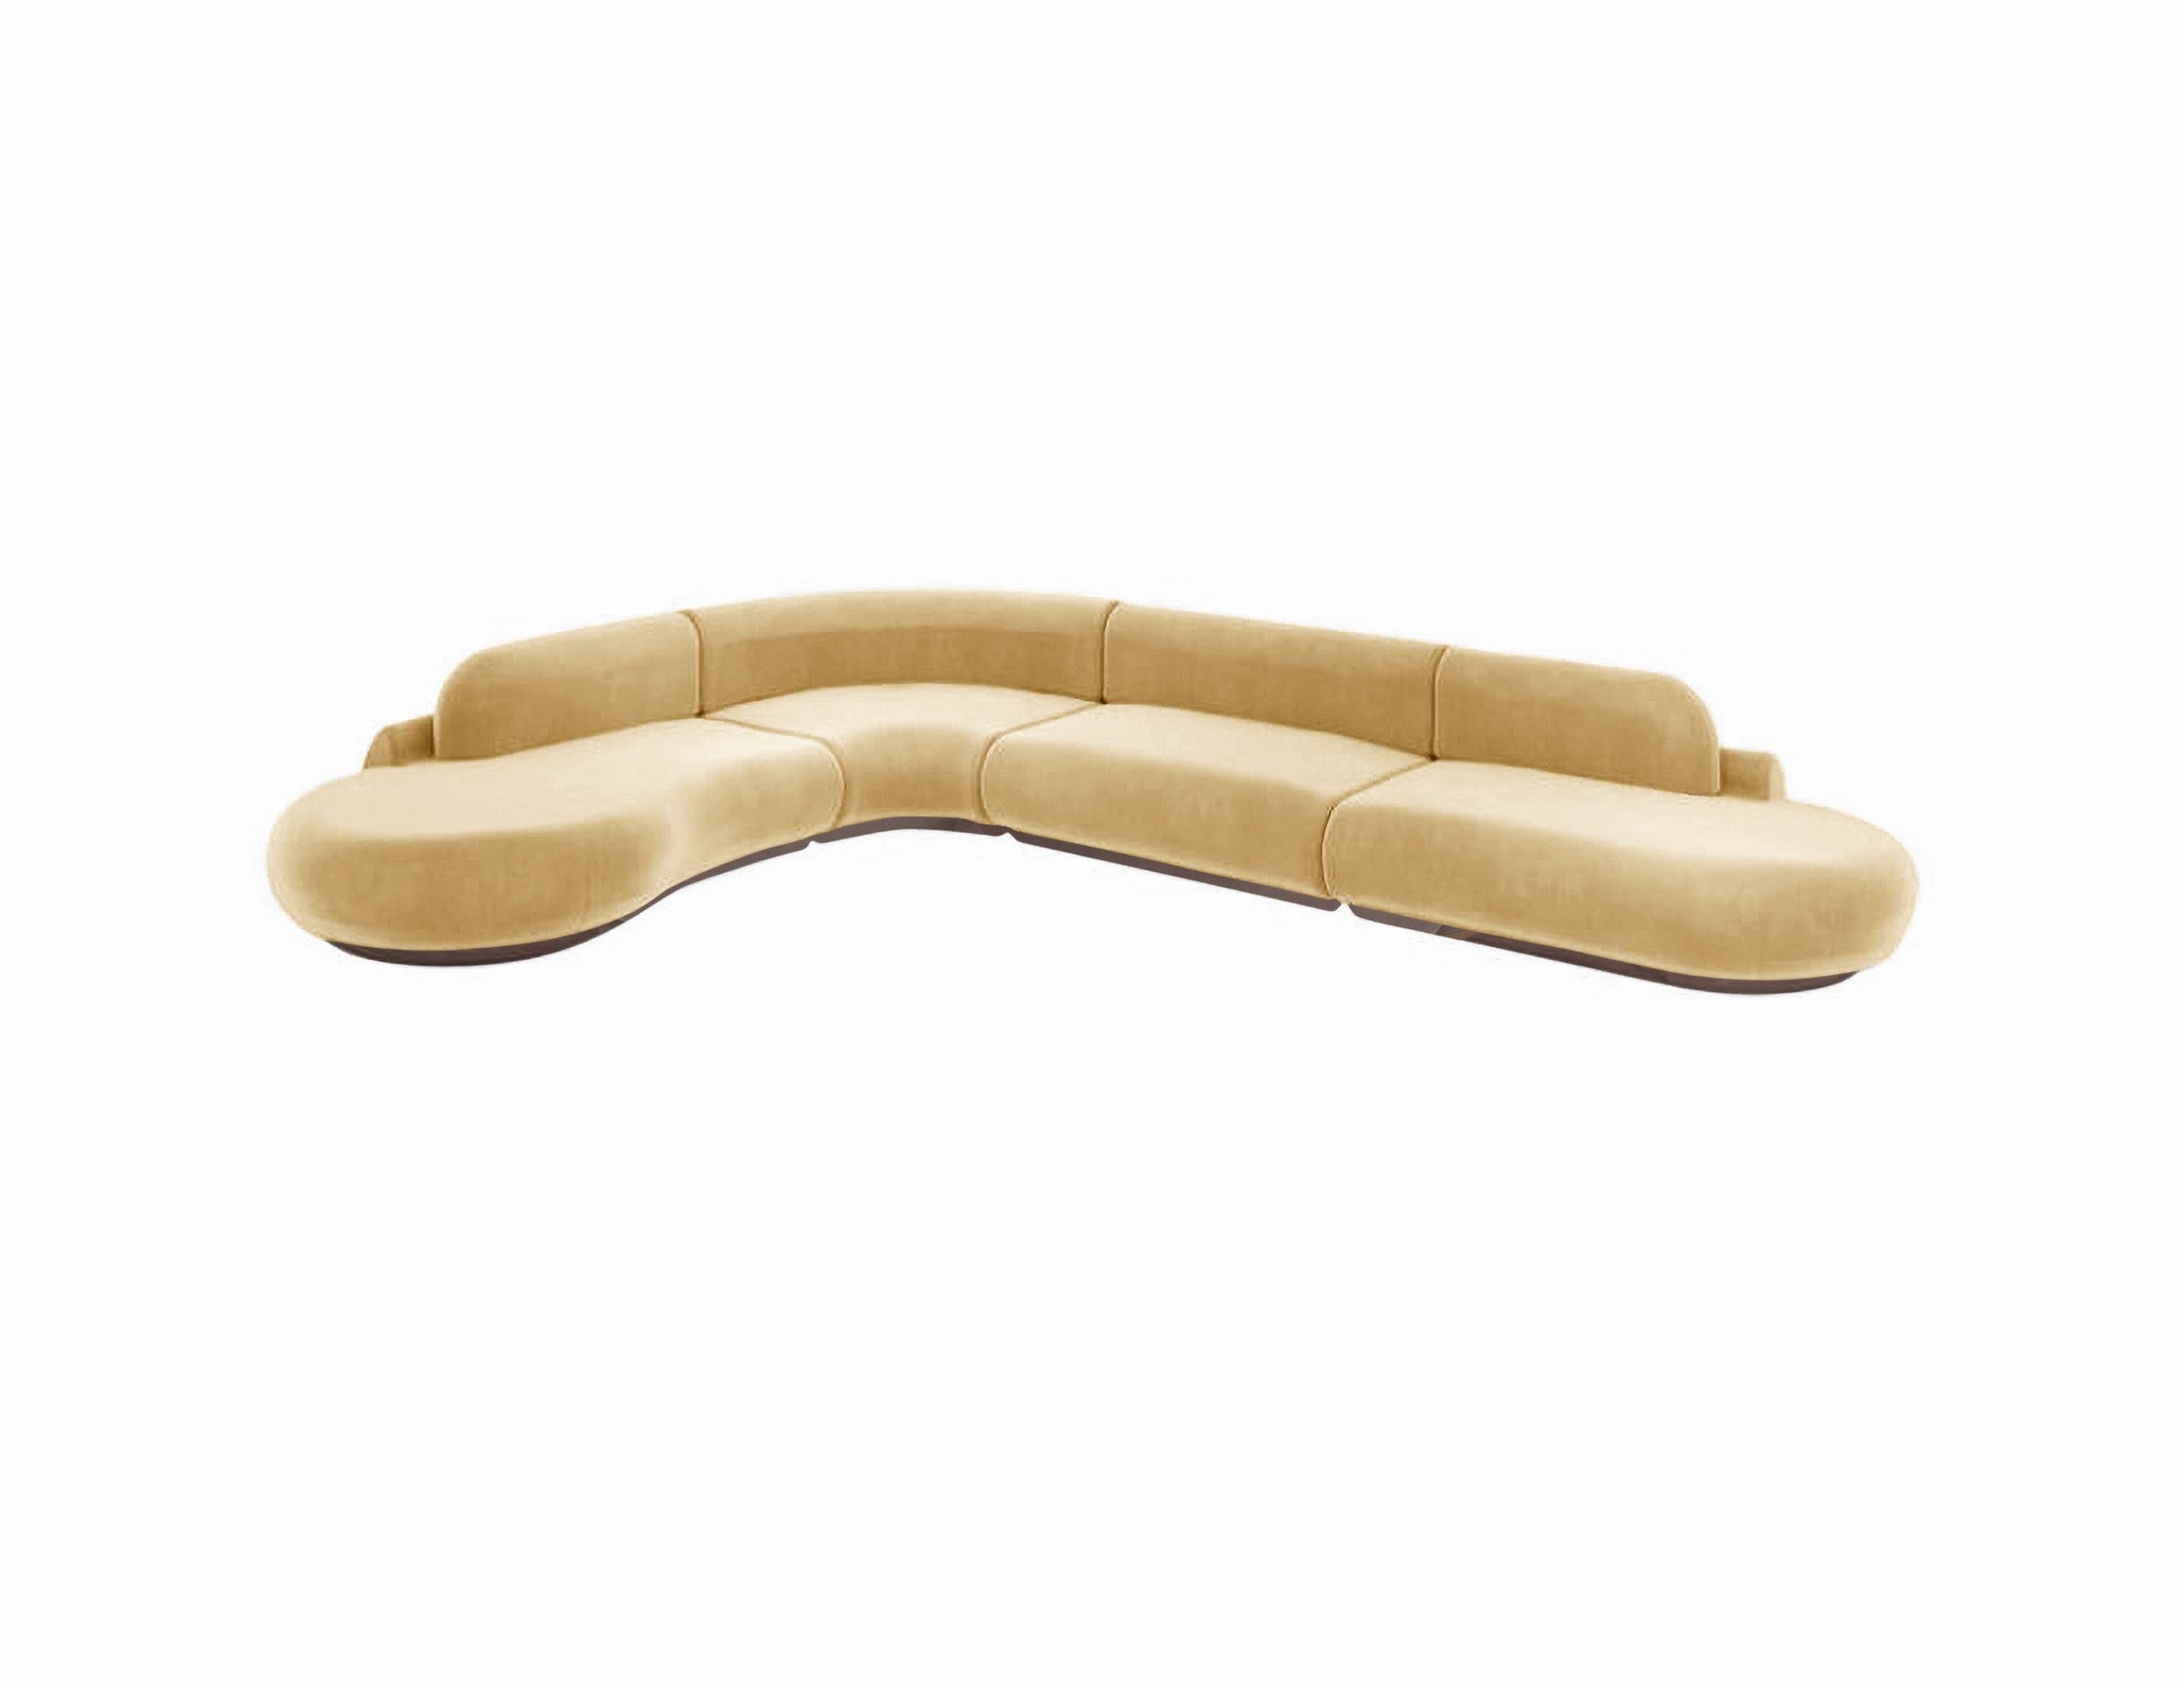 Naked Sectional Sofa, 4 Piece with Beech Ash-056-1 and Vigo Plantain For Sale